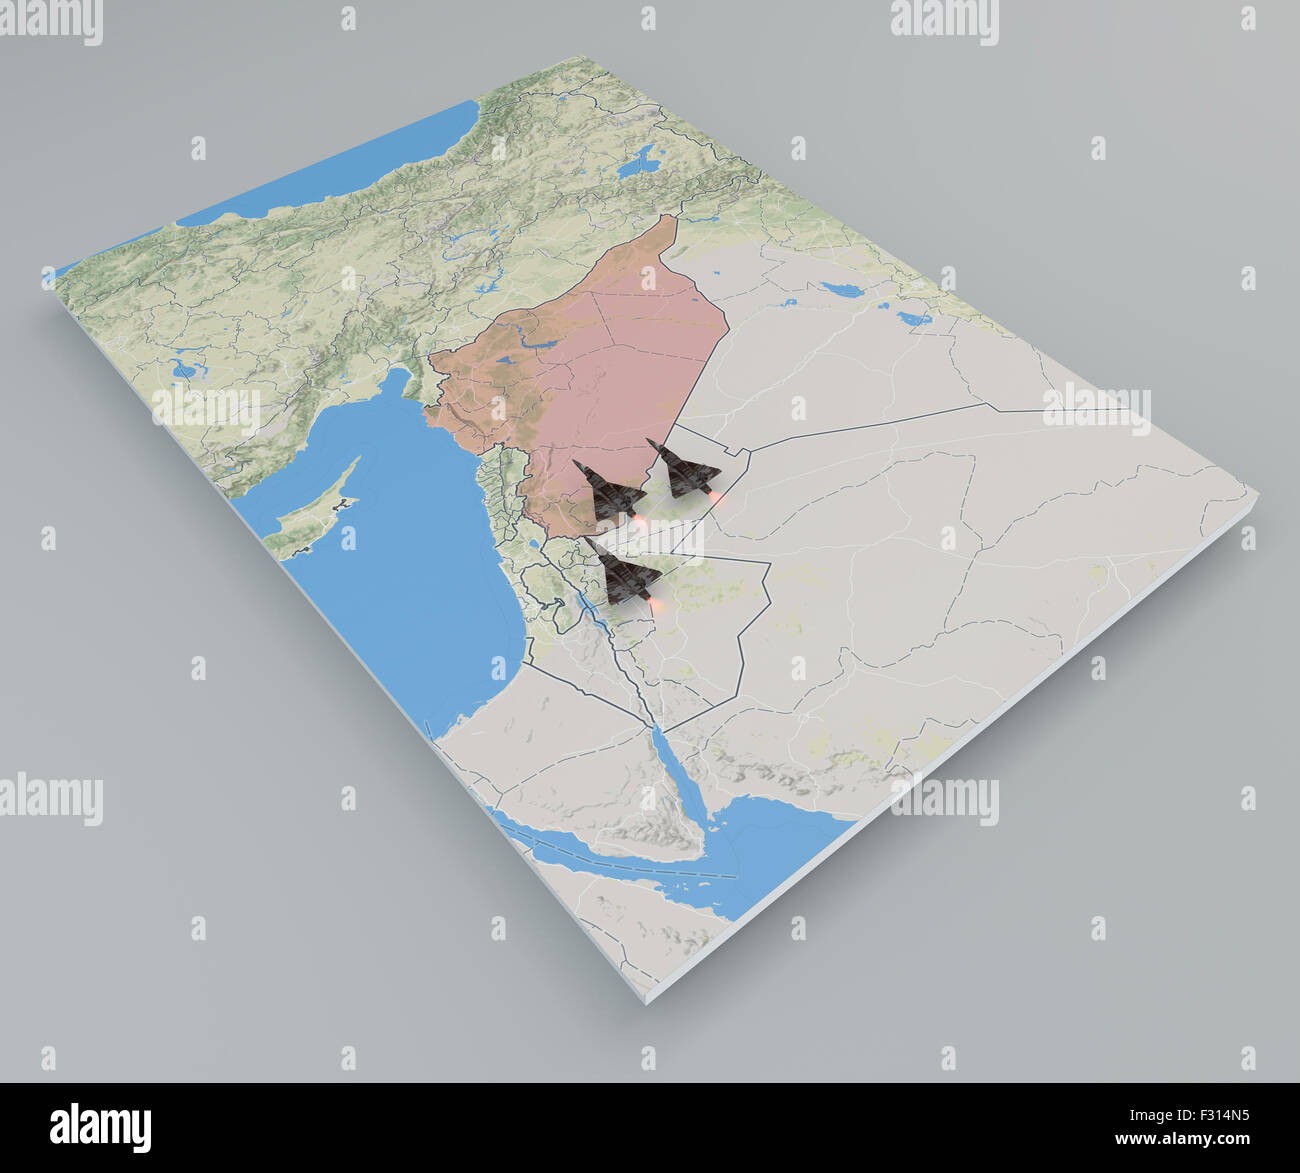 Flat physical map of Syria and military planes on grey background Stock Photo